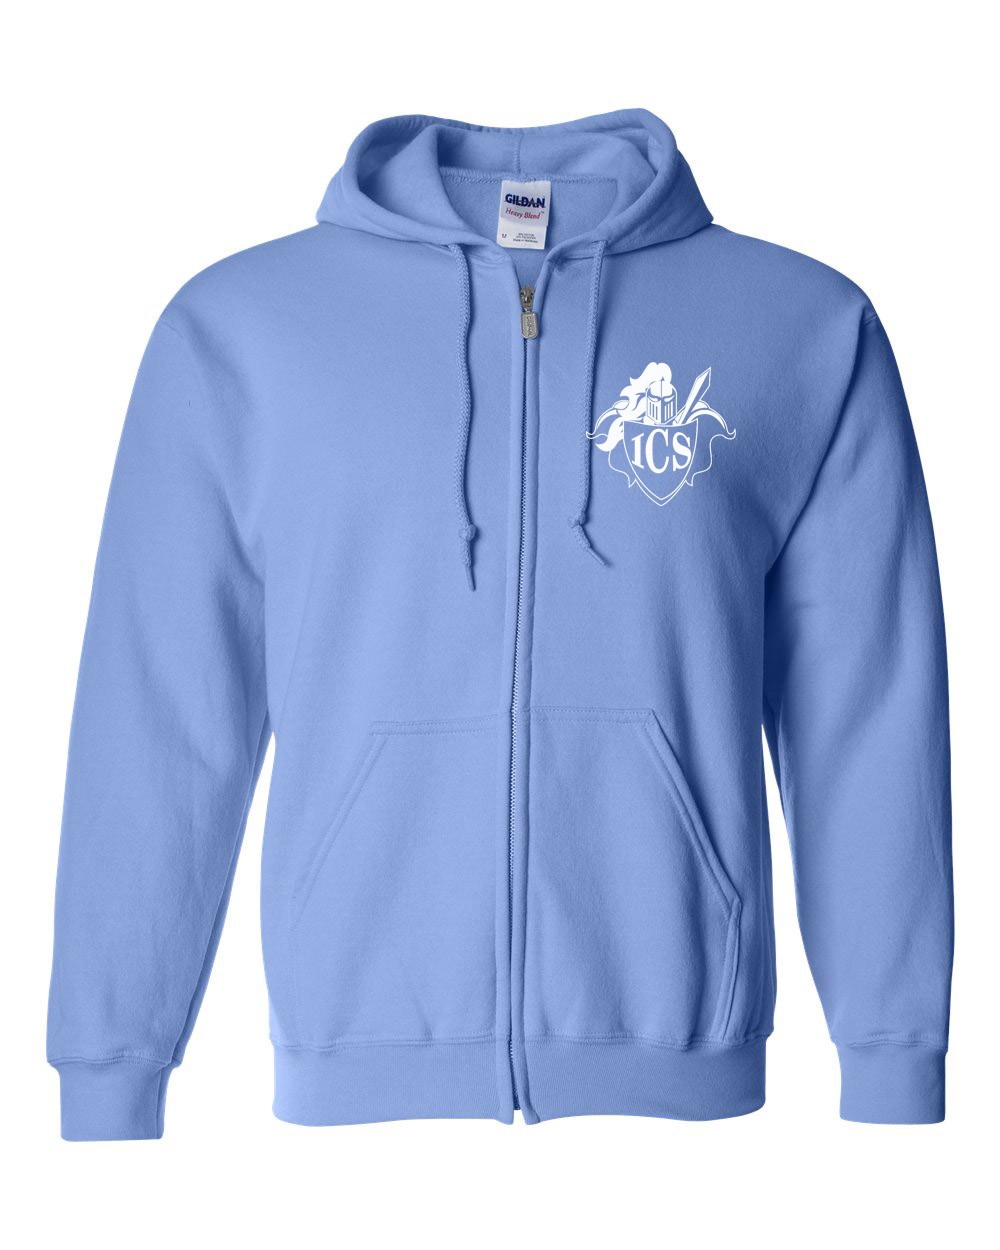 ICS Staff Zipper Hoodie w/ White Logo #F15-F16 - Please allow 2-3 Weeks for Delivery